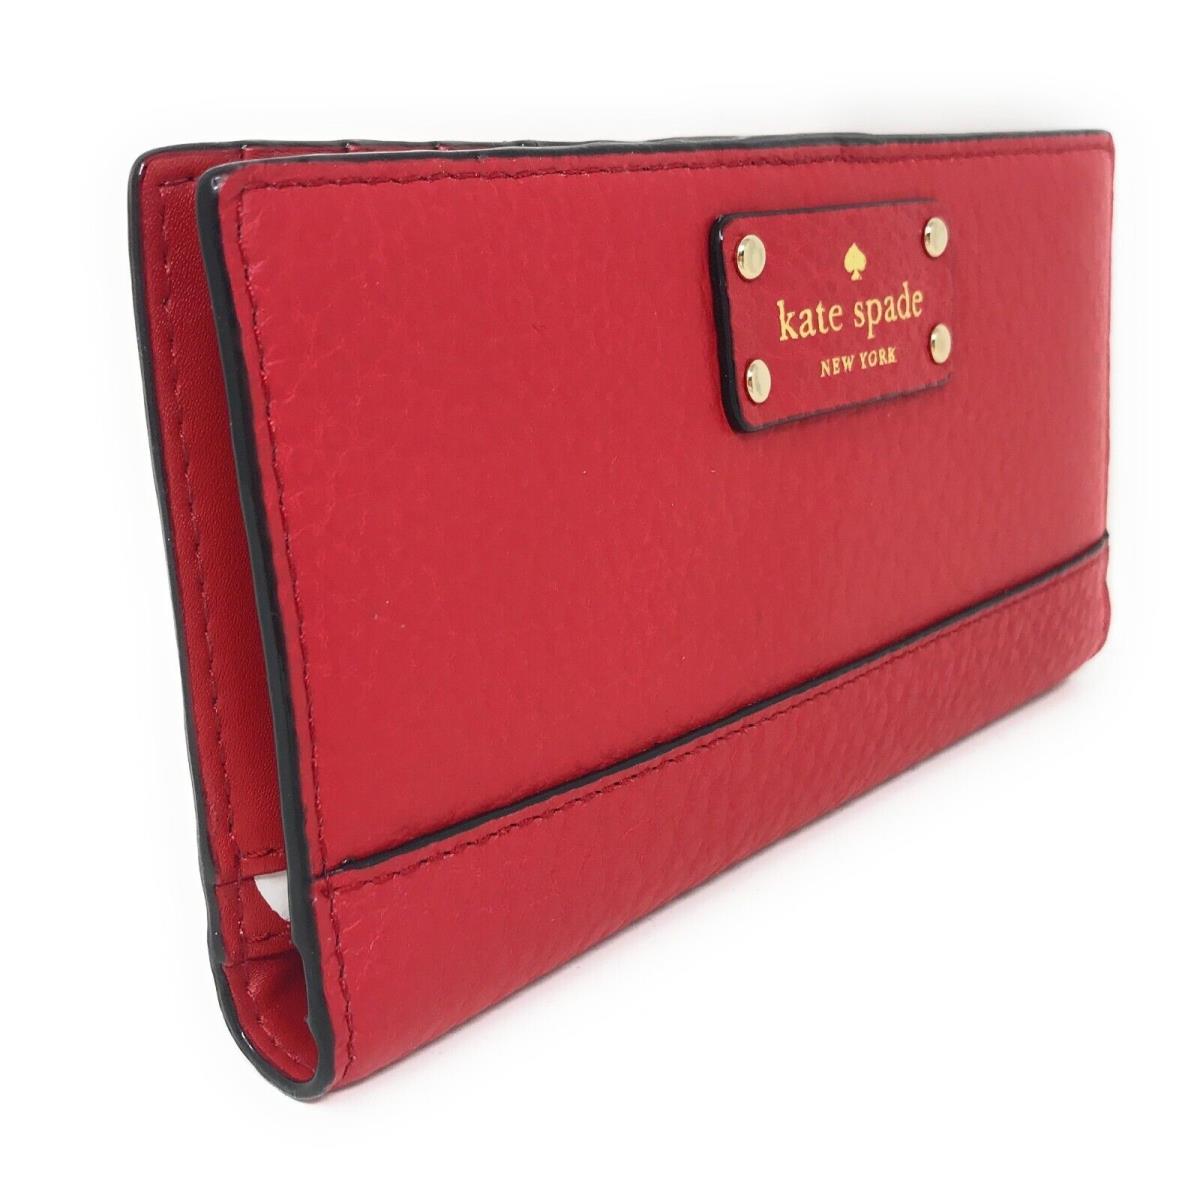 Kate Spade New York Bay Steet Stacy Leather Wallet - Red Carpet